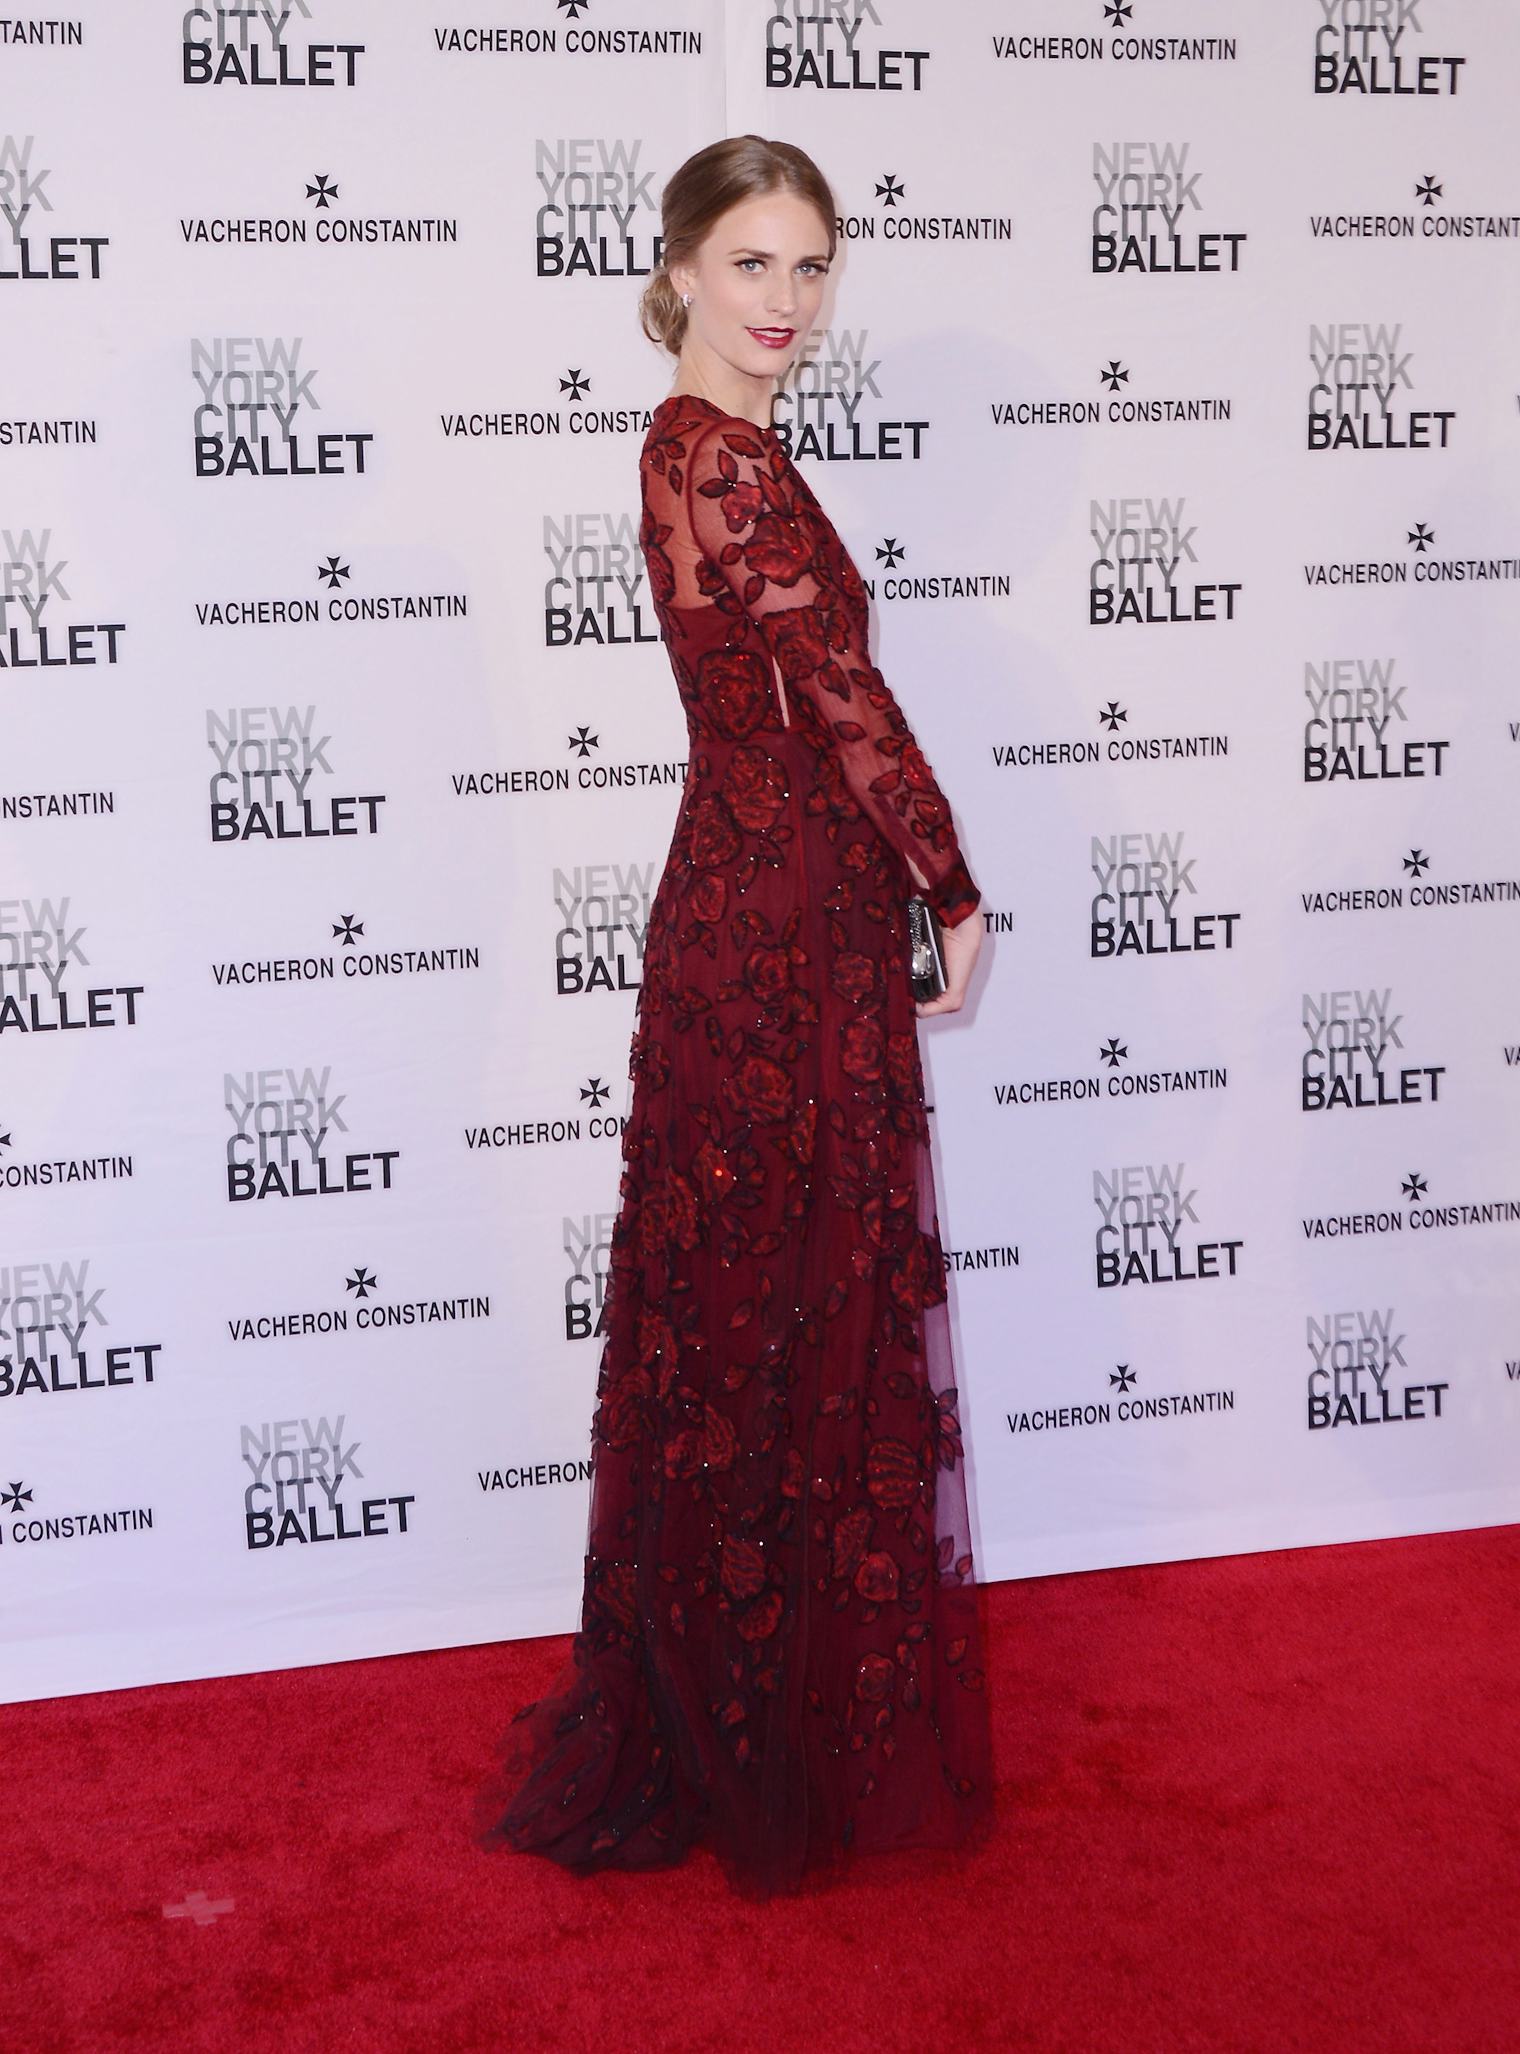 The New York City Ballet's Spring Gala Fashion Will Make You Want To